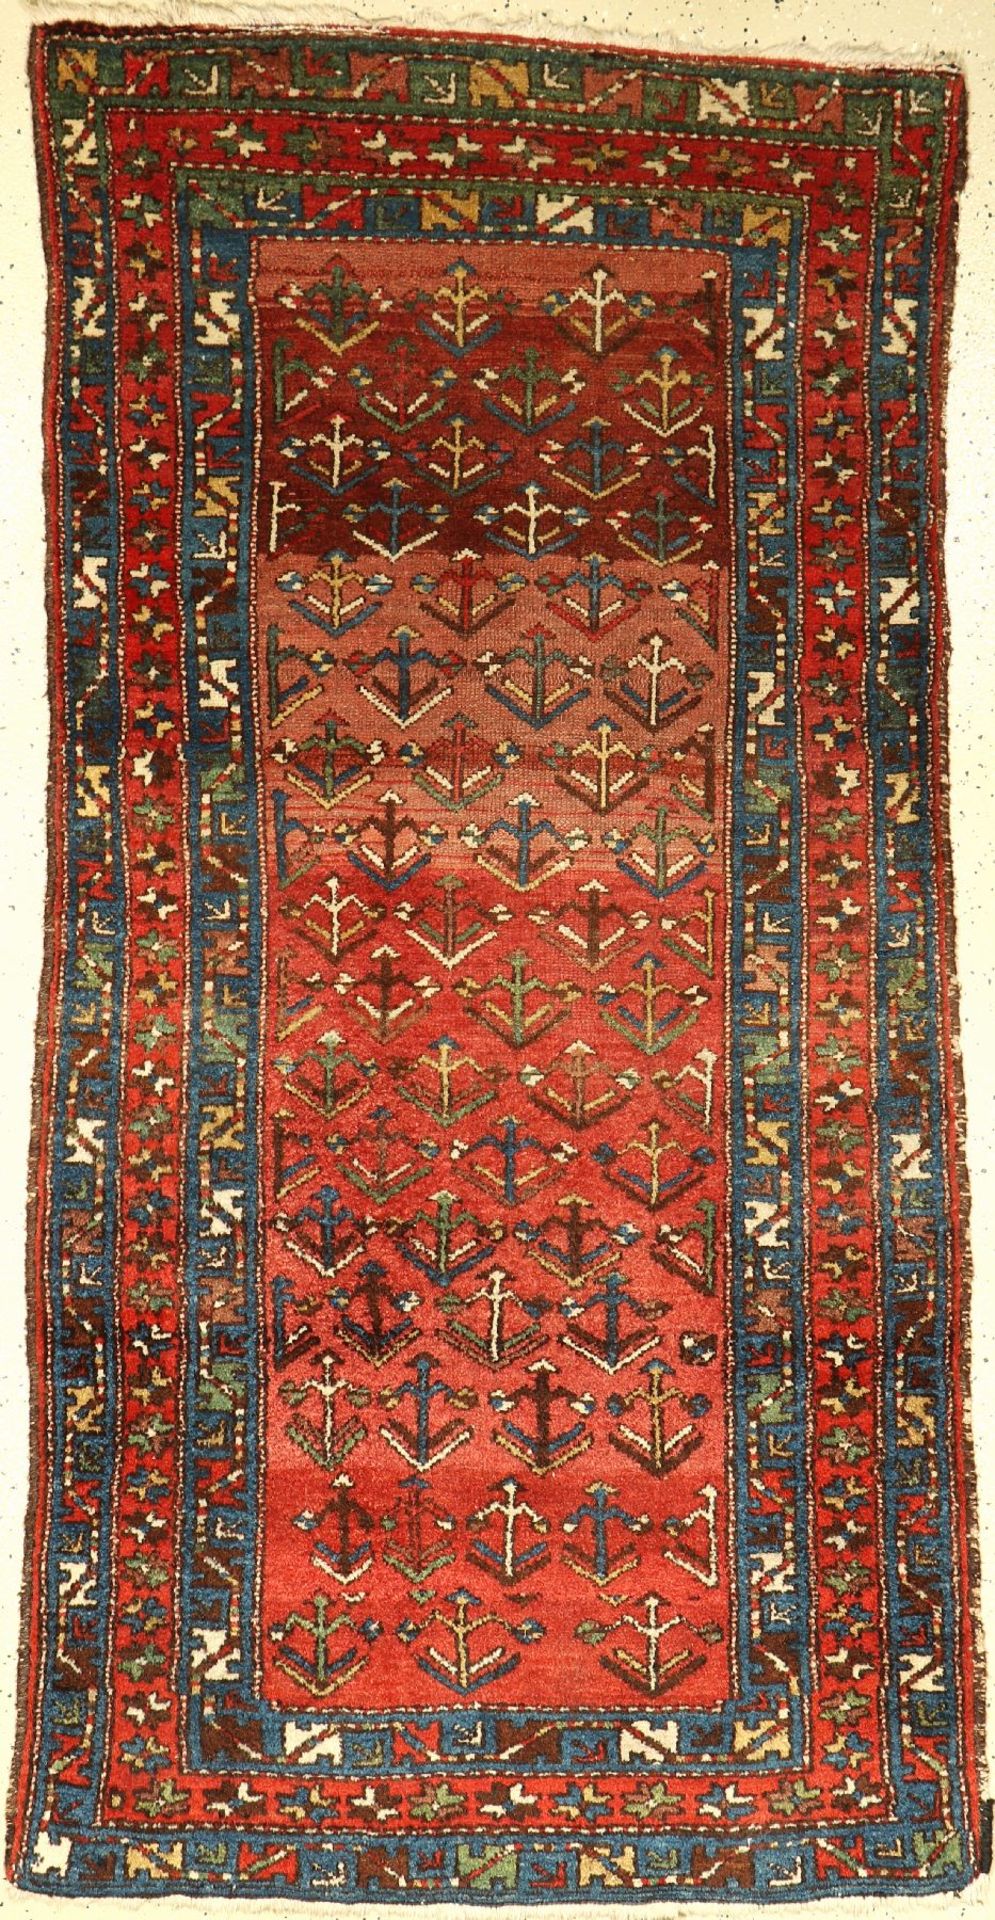 Antique Hamadan tree Rug, Persia, around 1900,wool on cotton, approx. 196 x 103 cm, natural colors